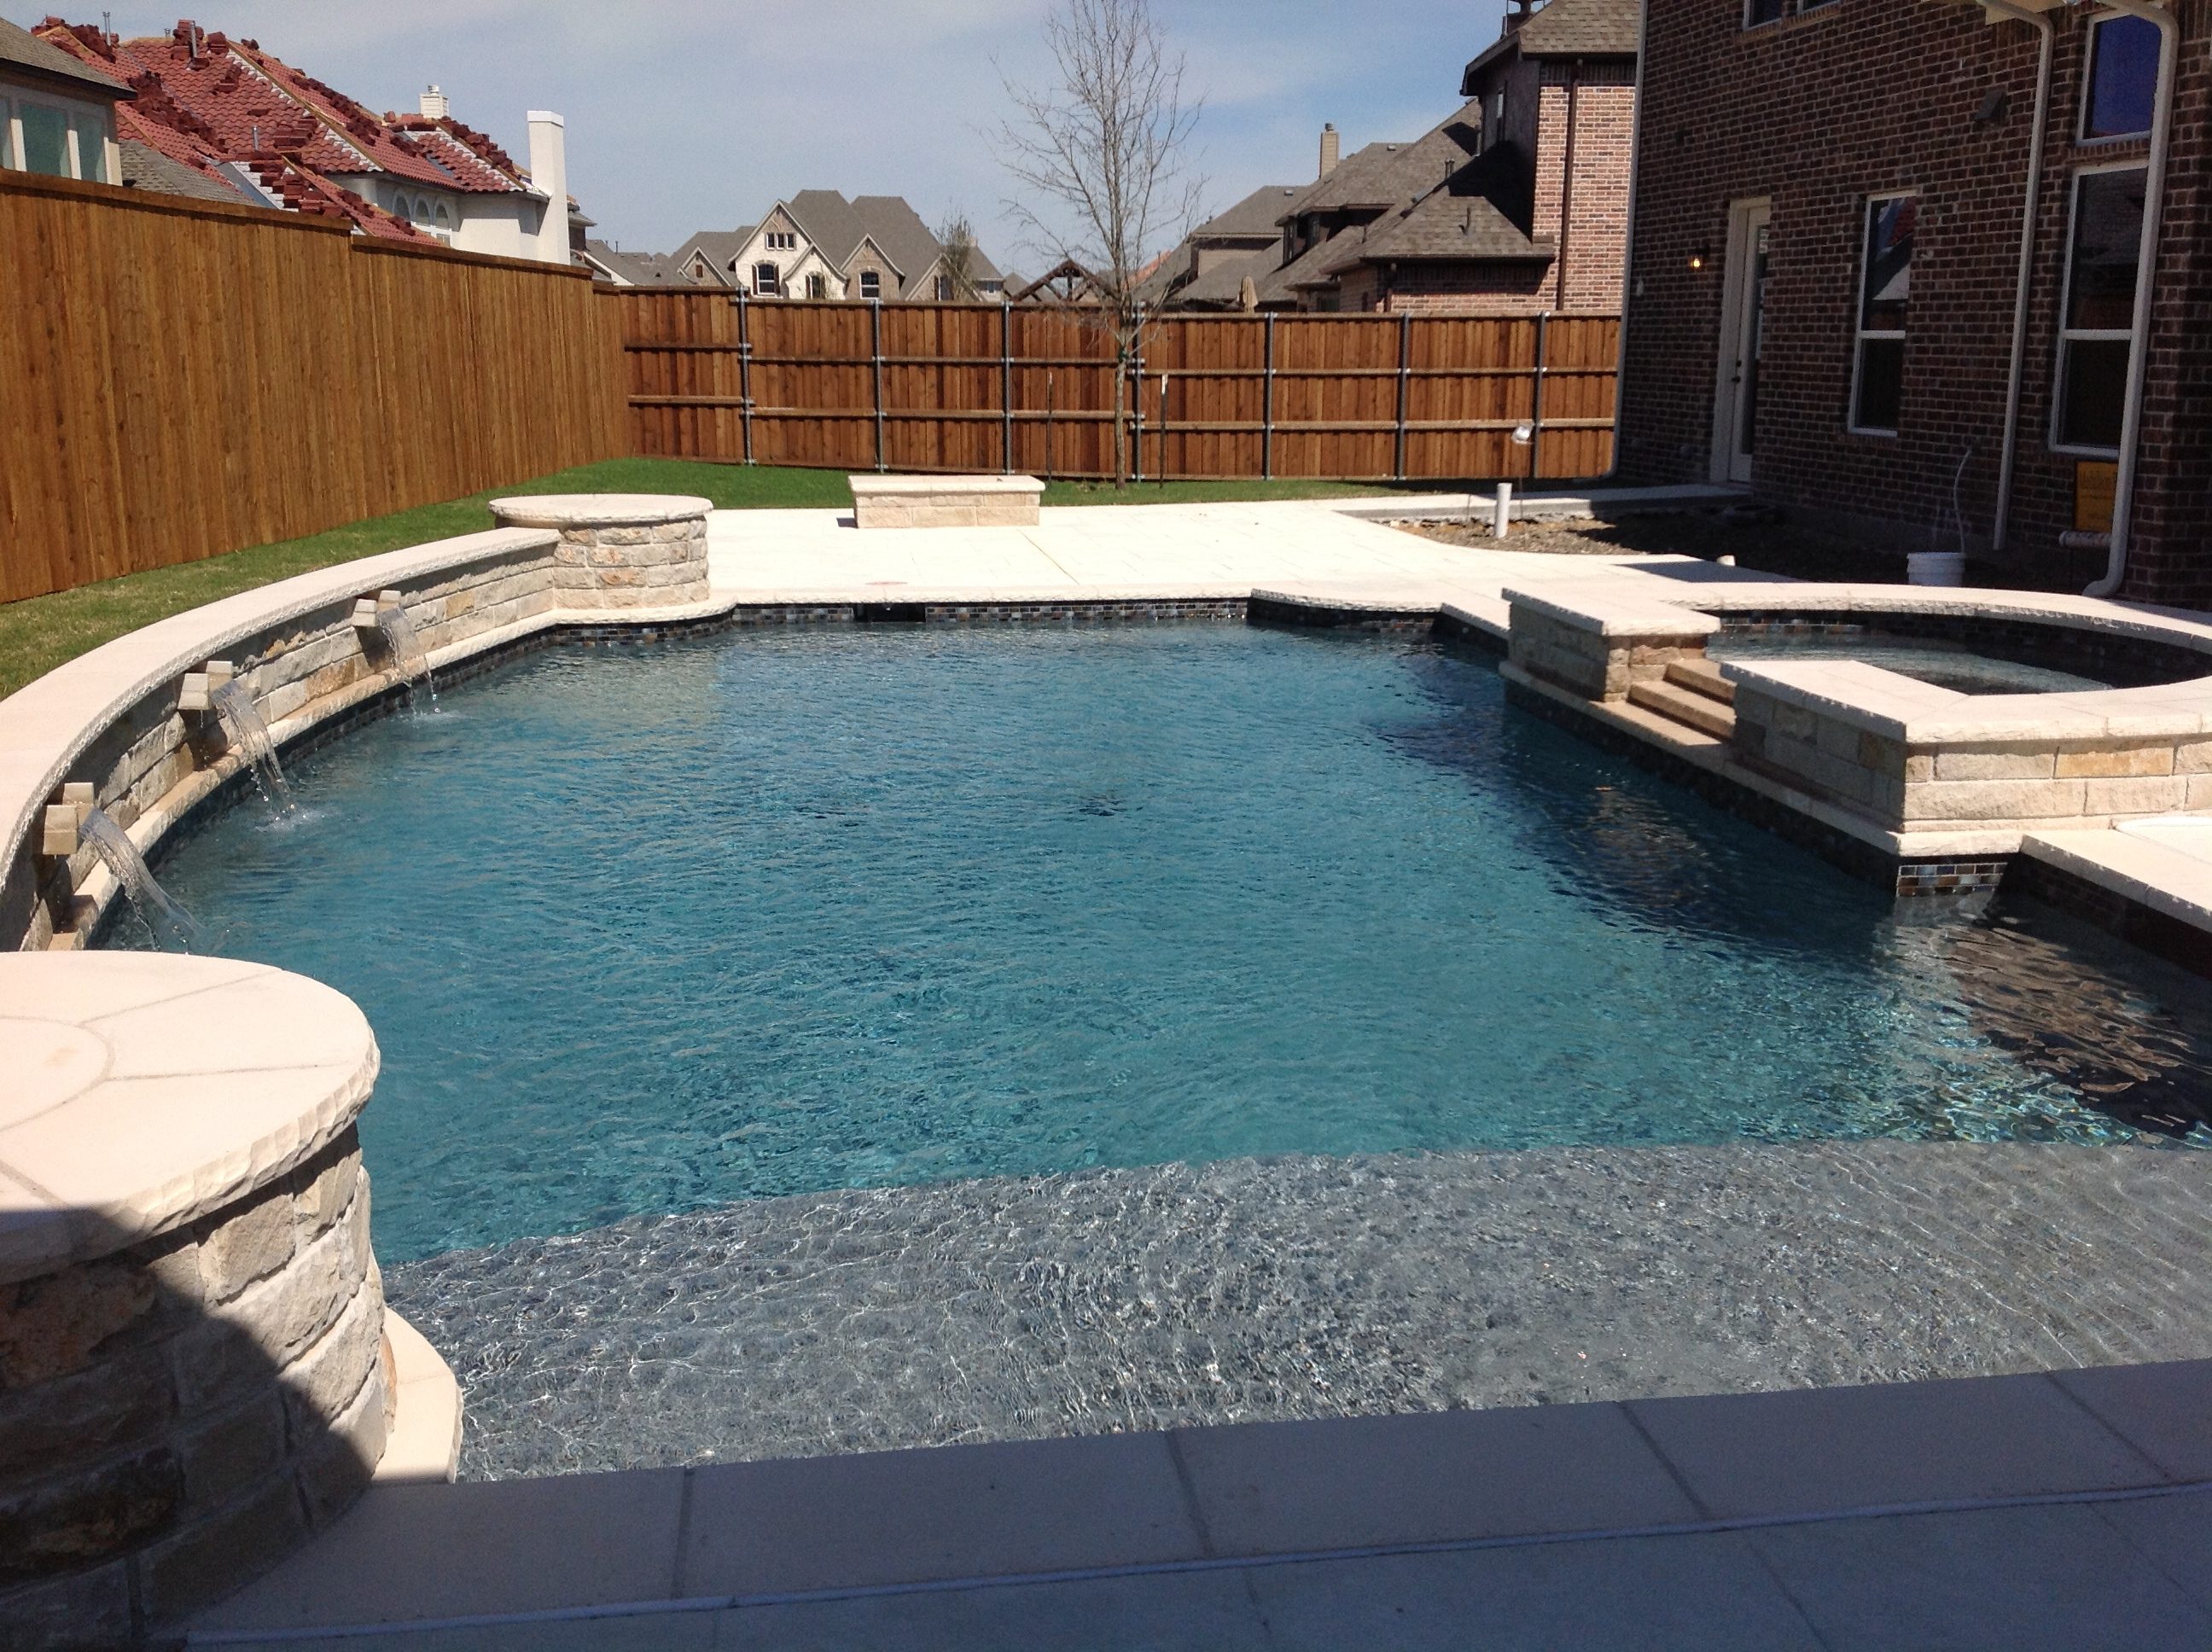 A pool with a stone wall and a large bench.